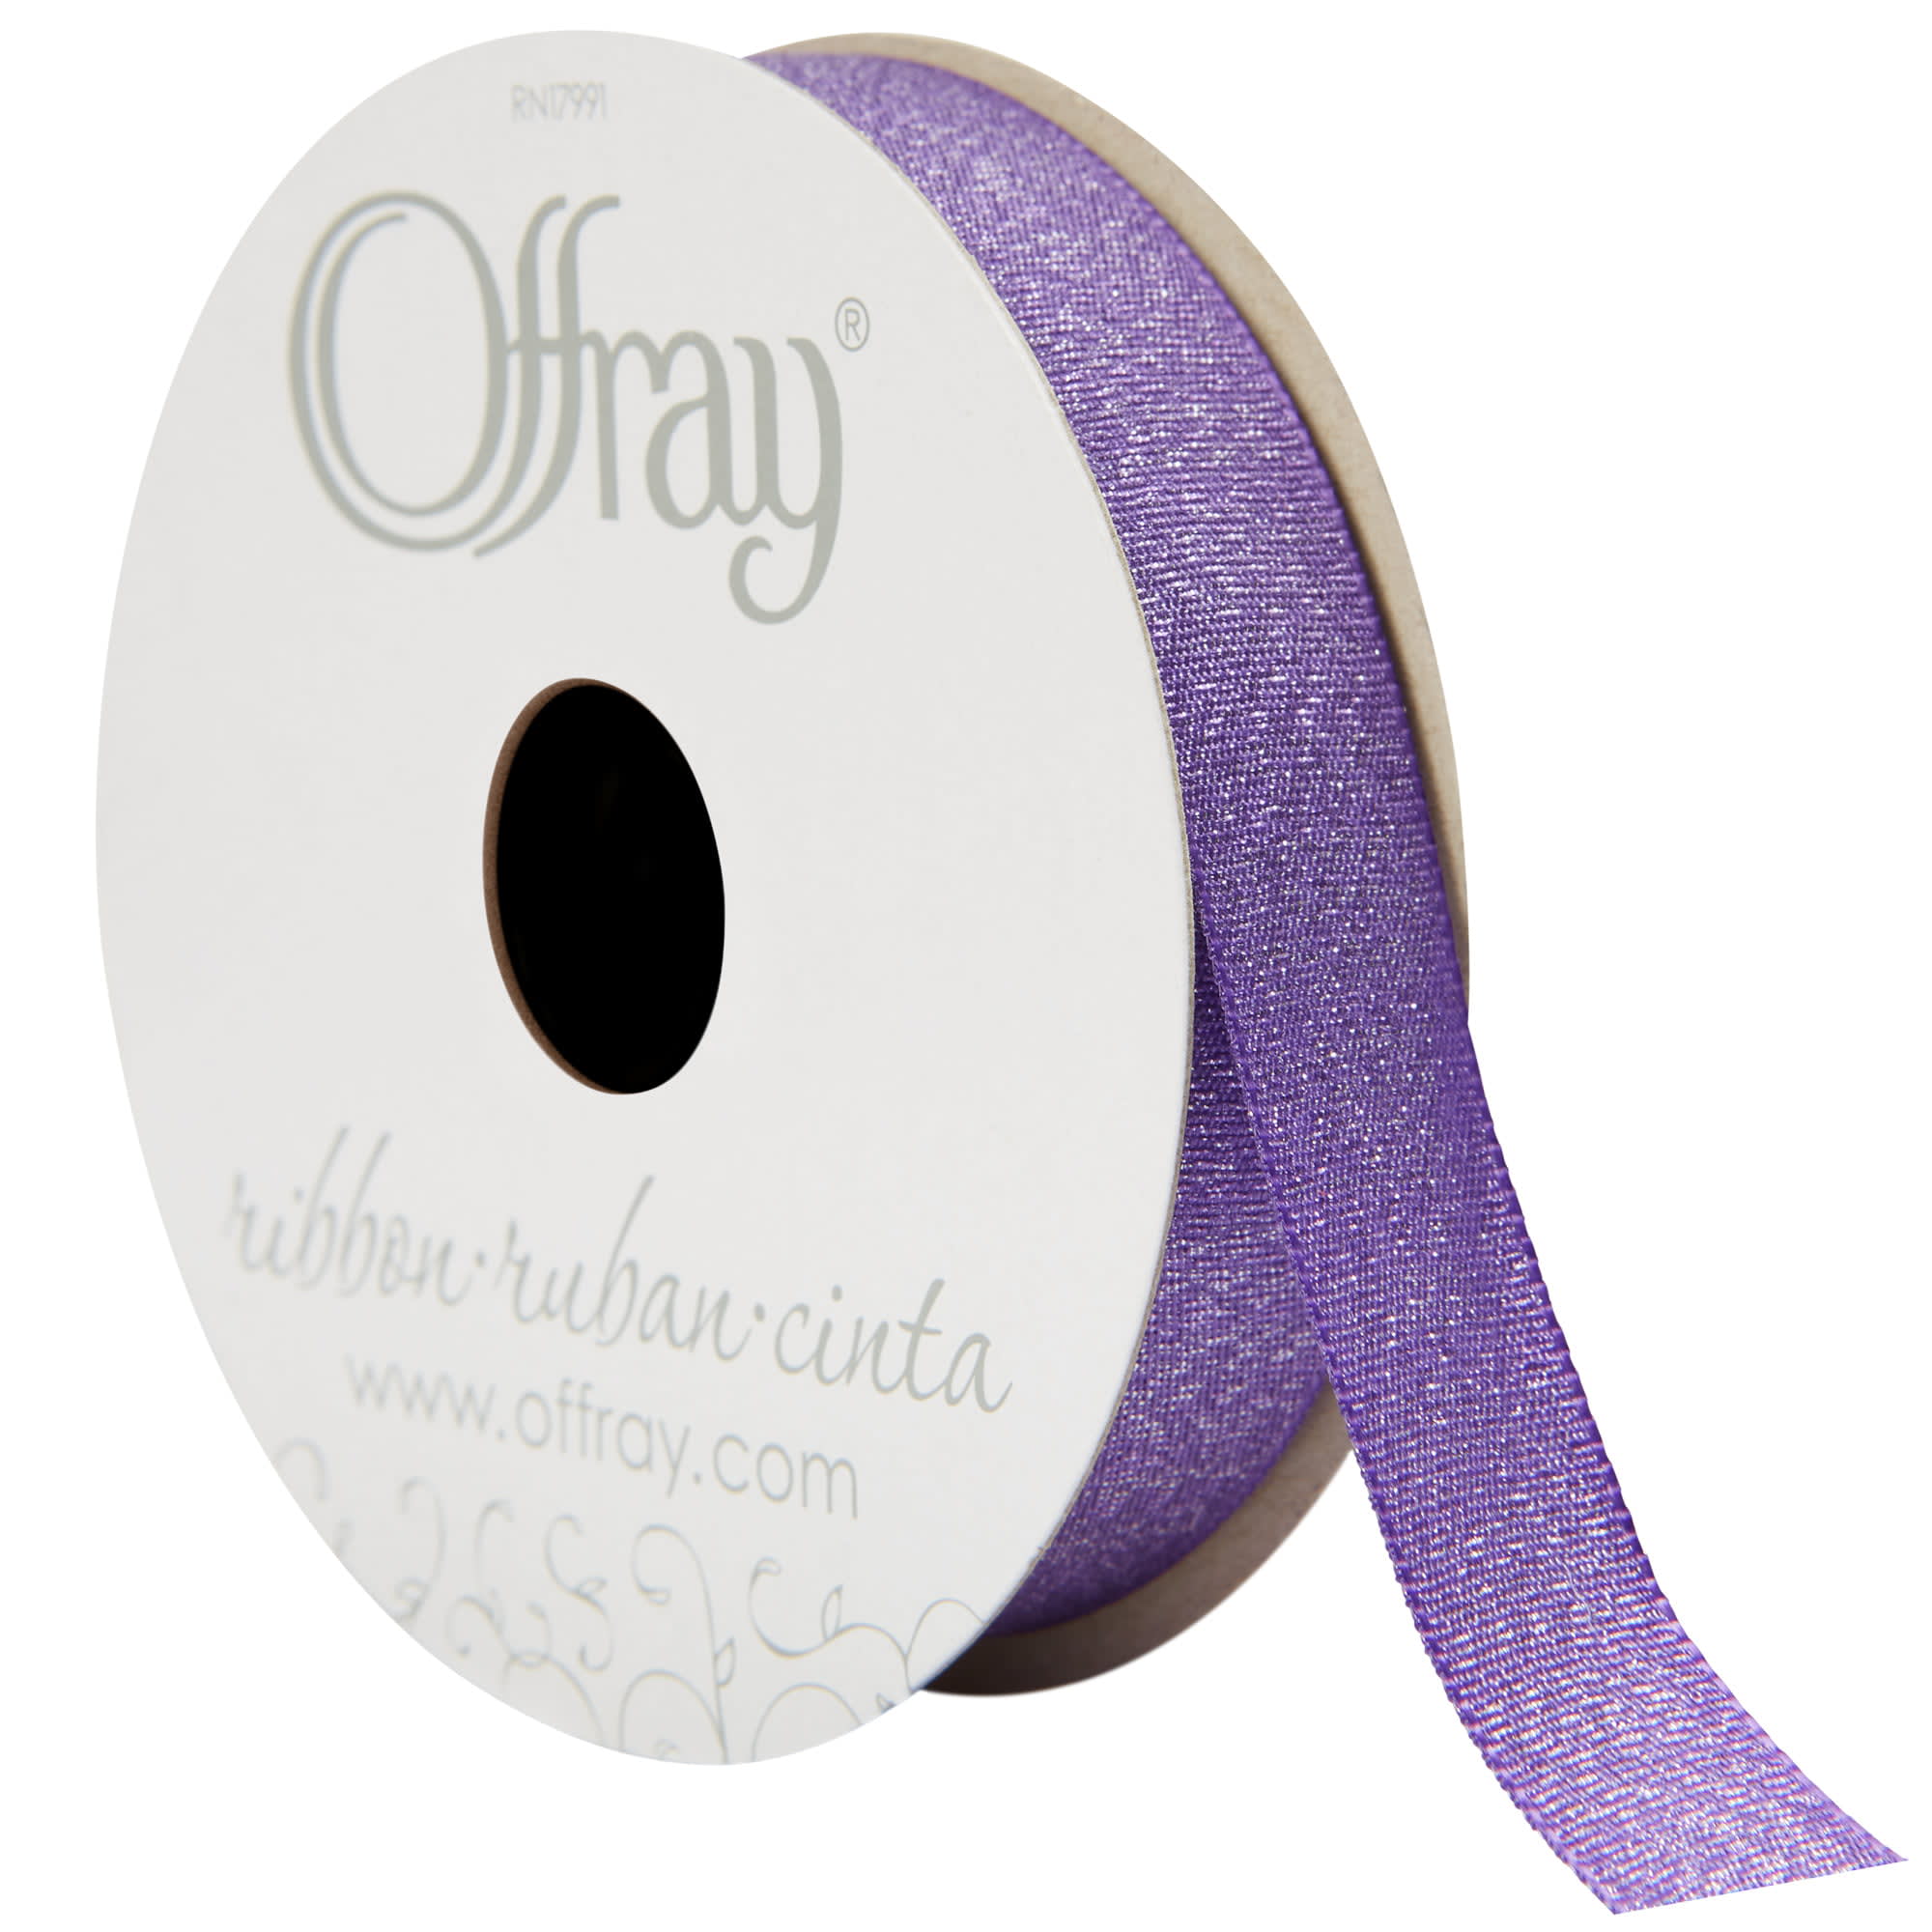 Offray Ribbon, Royal Blue 1 1/2 inch Wired Edge Woven Ribbon for Crafts,  Gifting, and Wedding, 9 feet - DroneUp Delivery